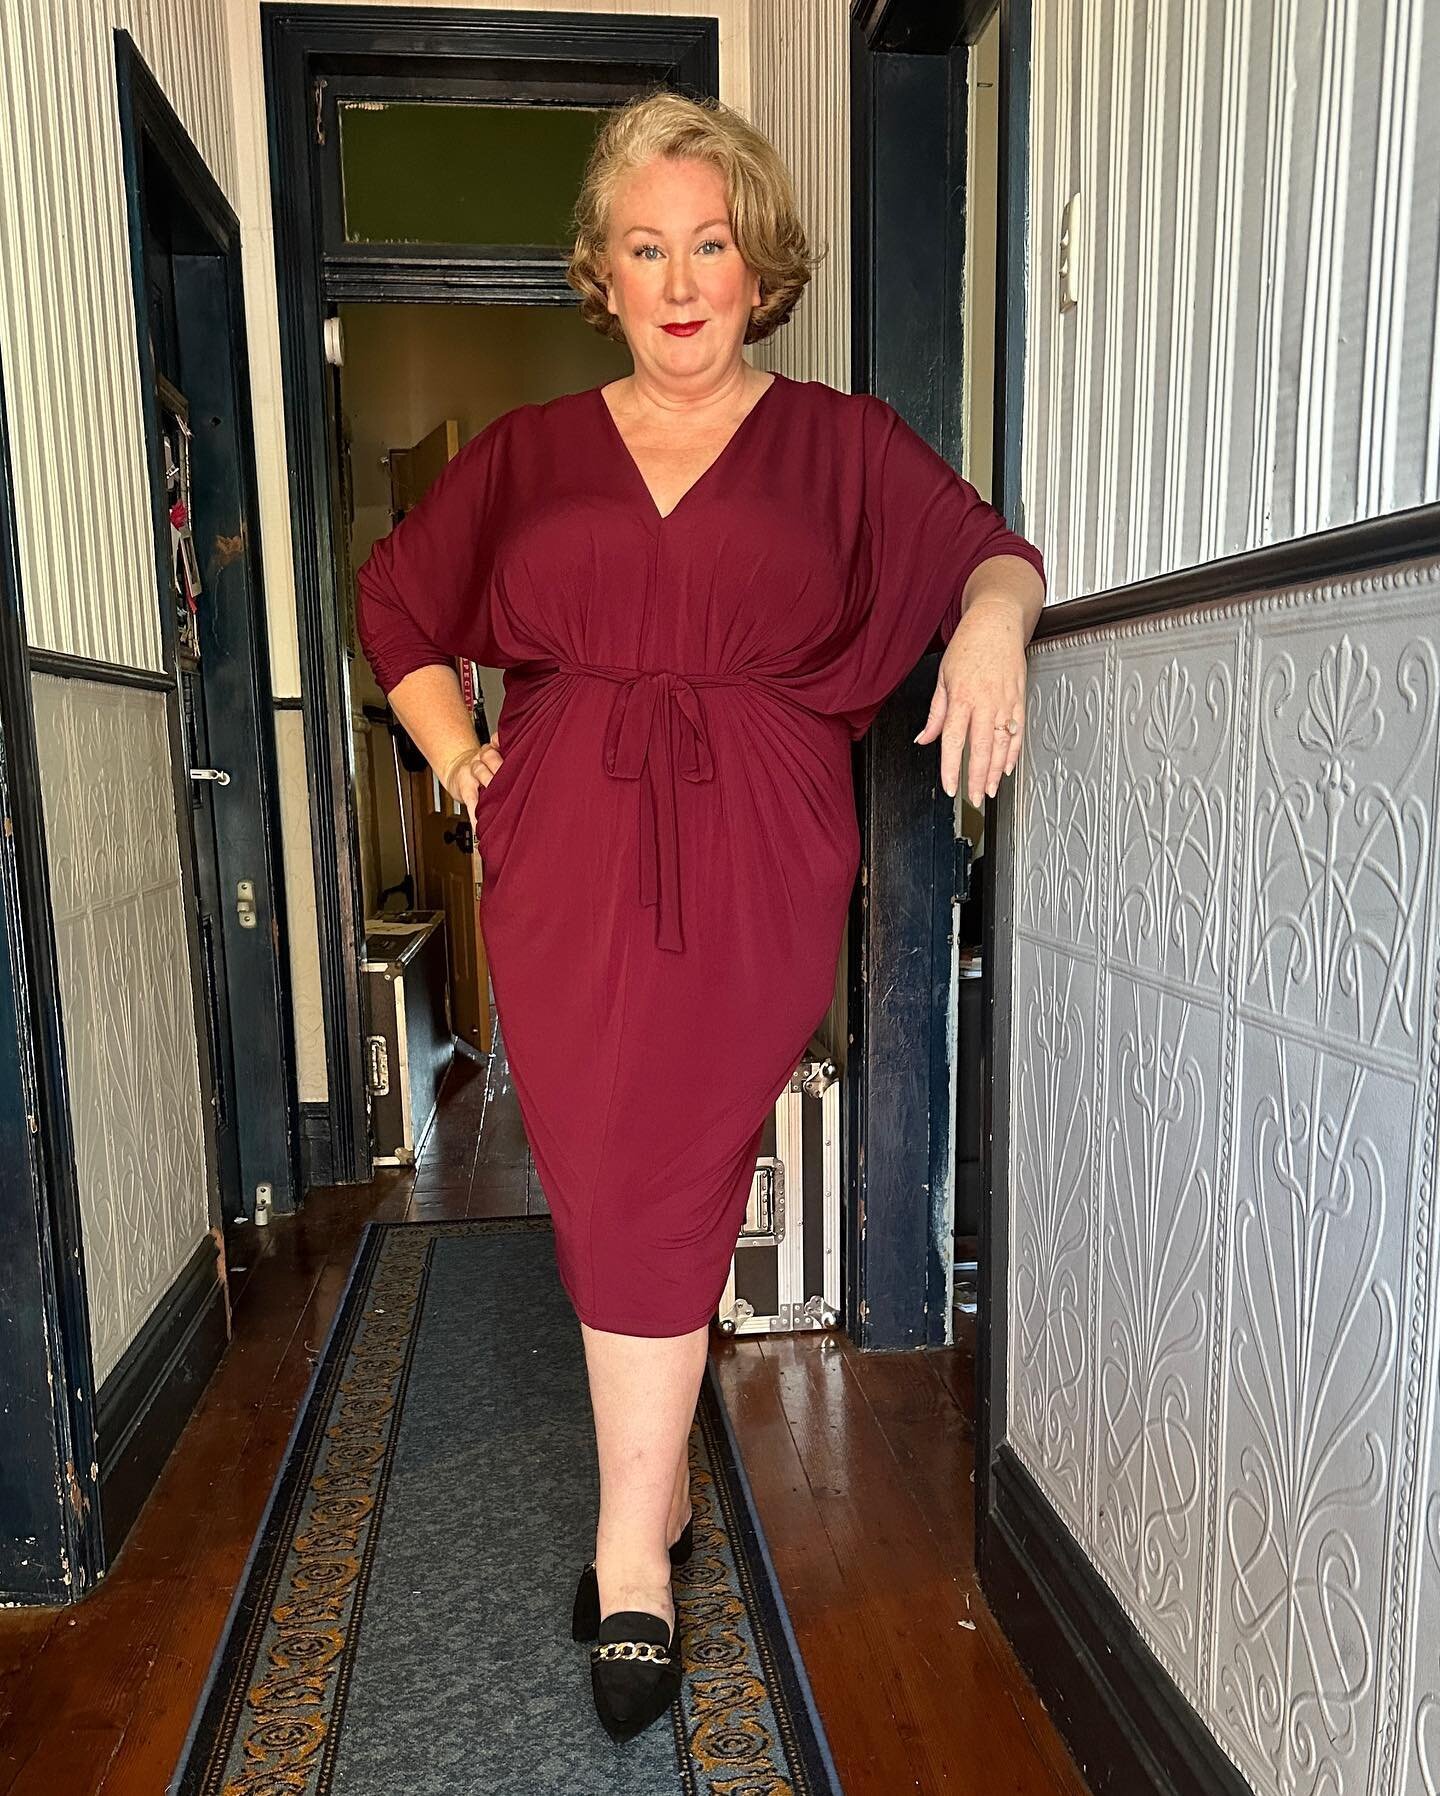 And some more amazing curvy goodness. 
Here we have:
The Moonlight Bird - the Nancy dress in a 22 - from &amp; she is perfect and so comfortable. The front tie detail cinches the waist&hellip; so flattering! It has a classic late 50s to early 60s aes